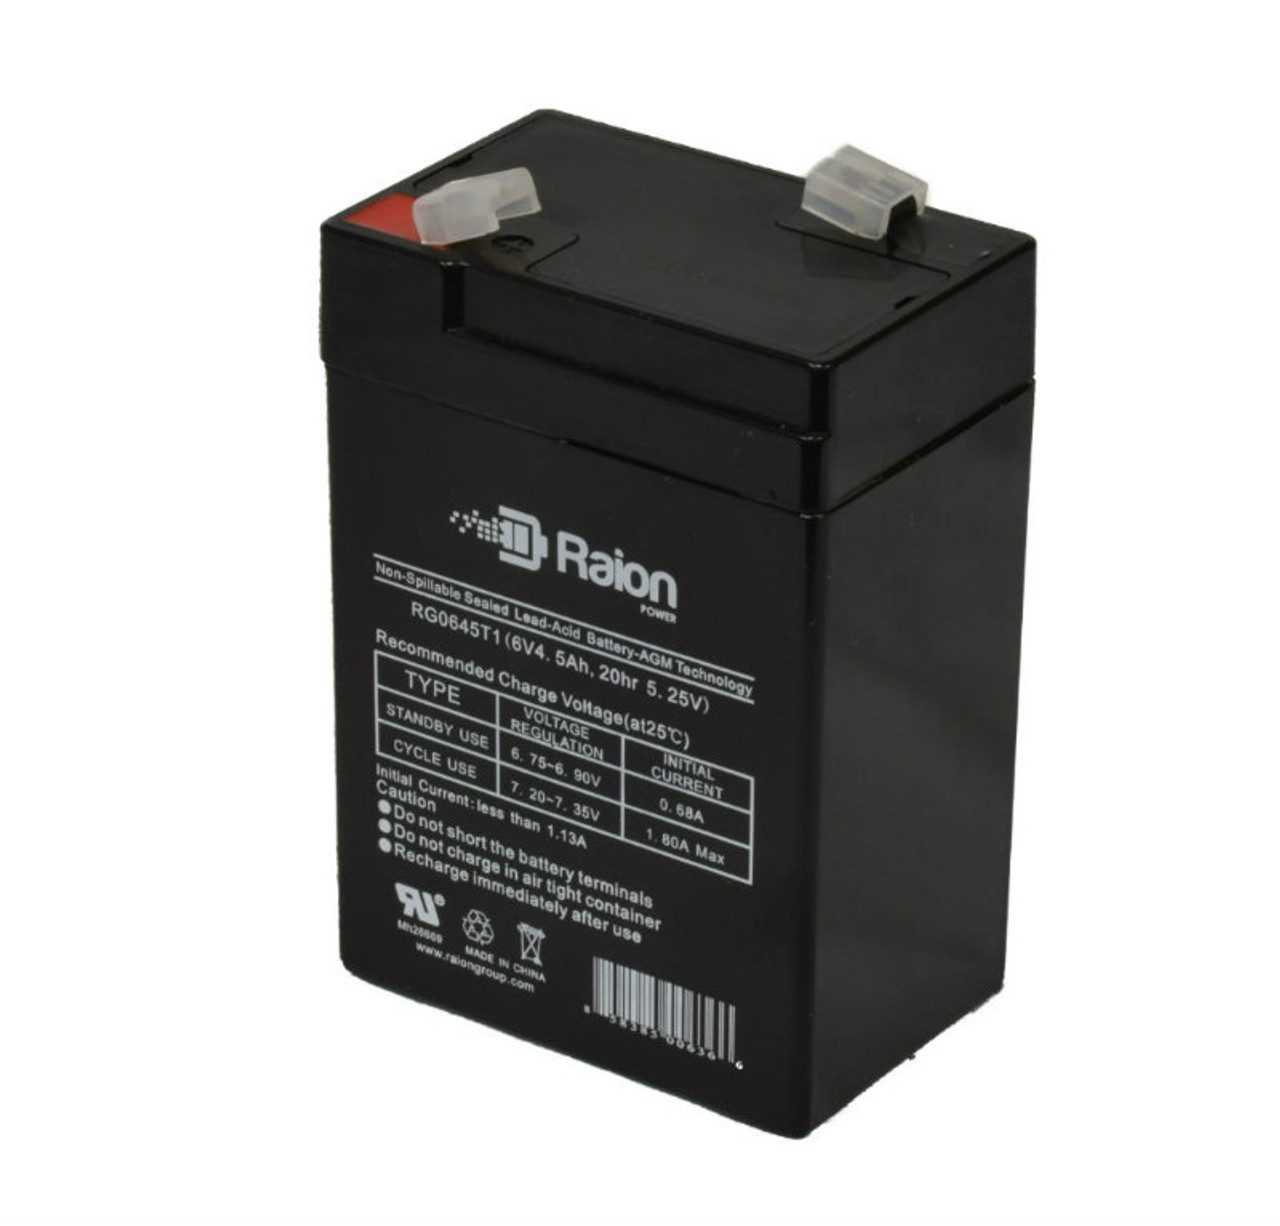 Raion Power RG0645T1 6V 4.5Ah Replacement Battery Cartridge for LongWay 3FM4.5A